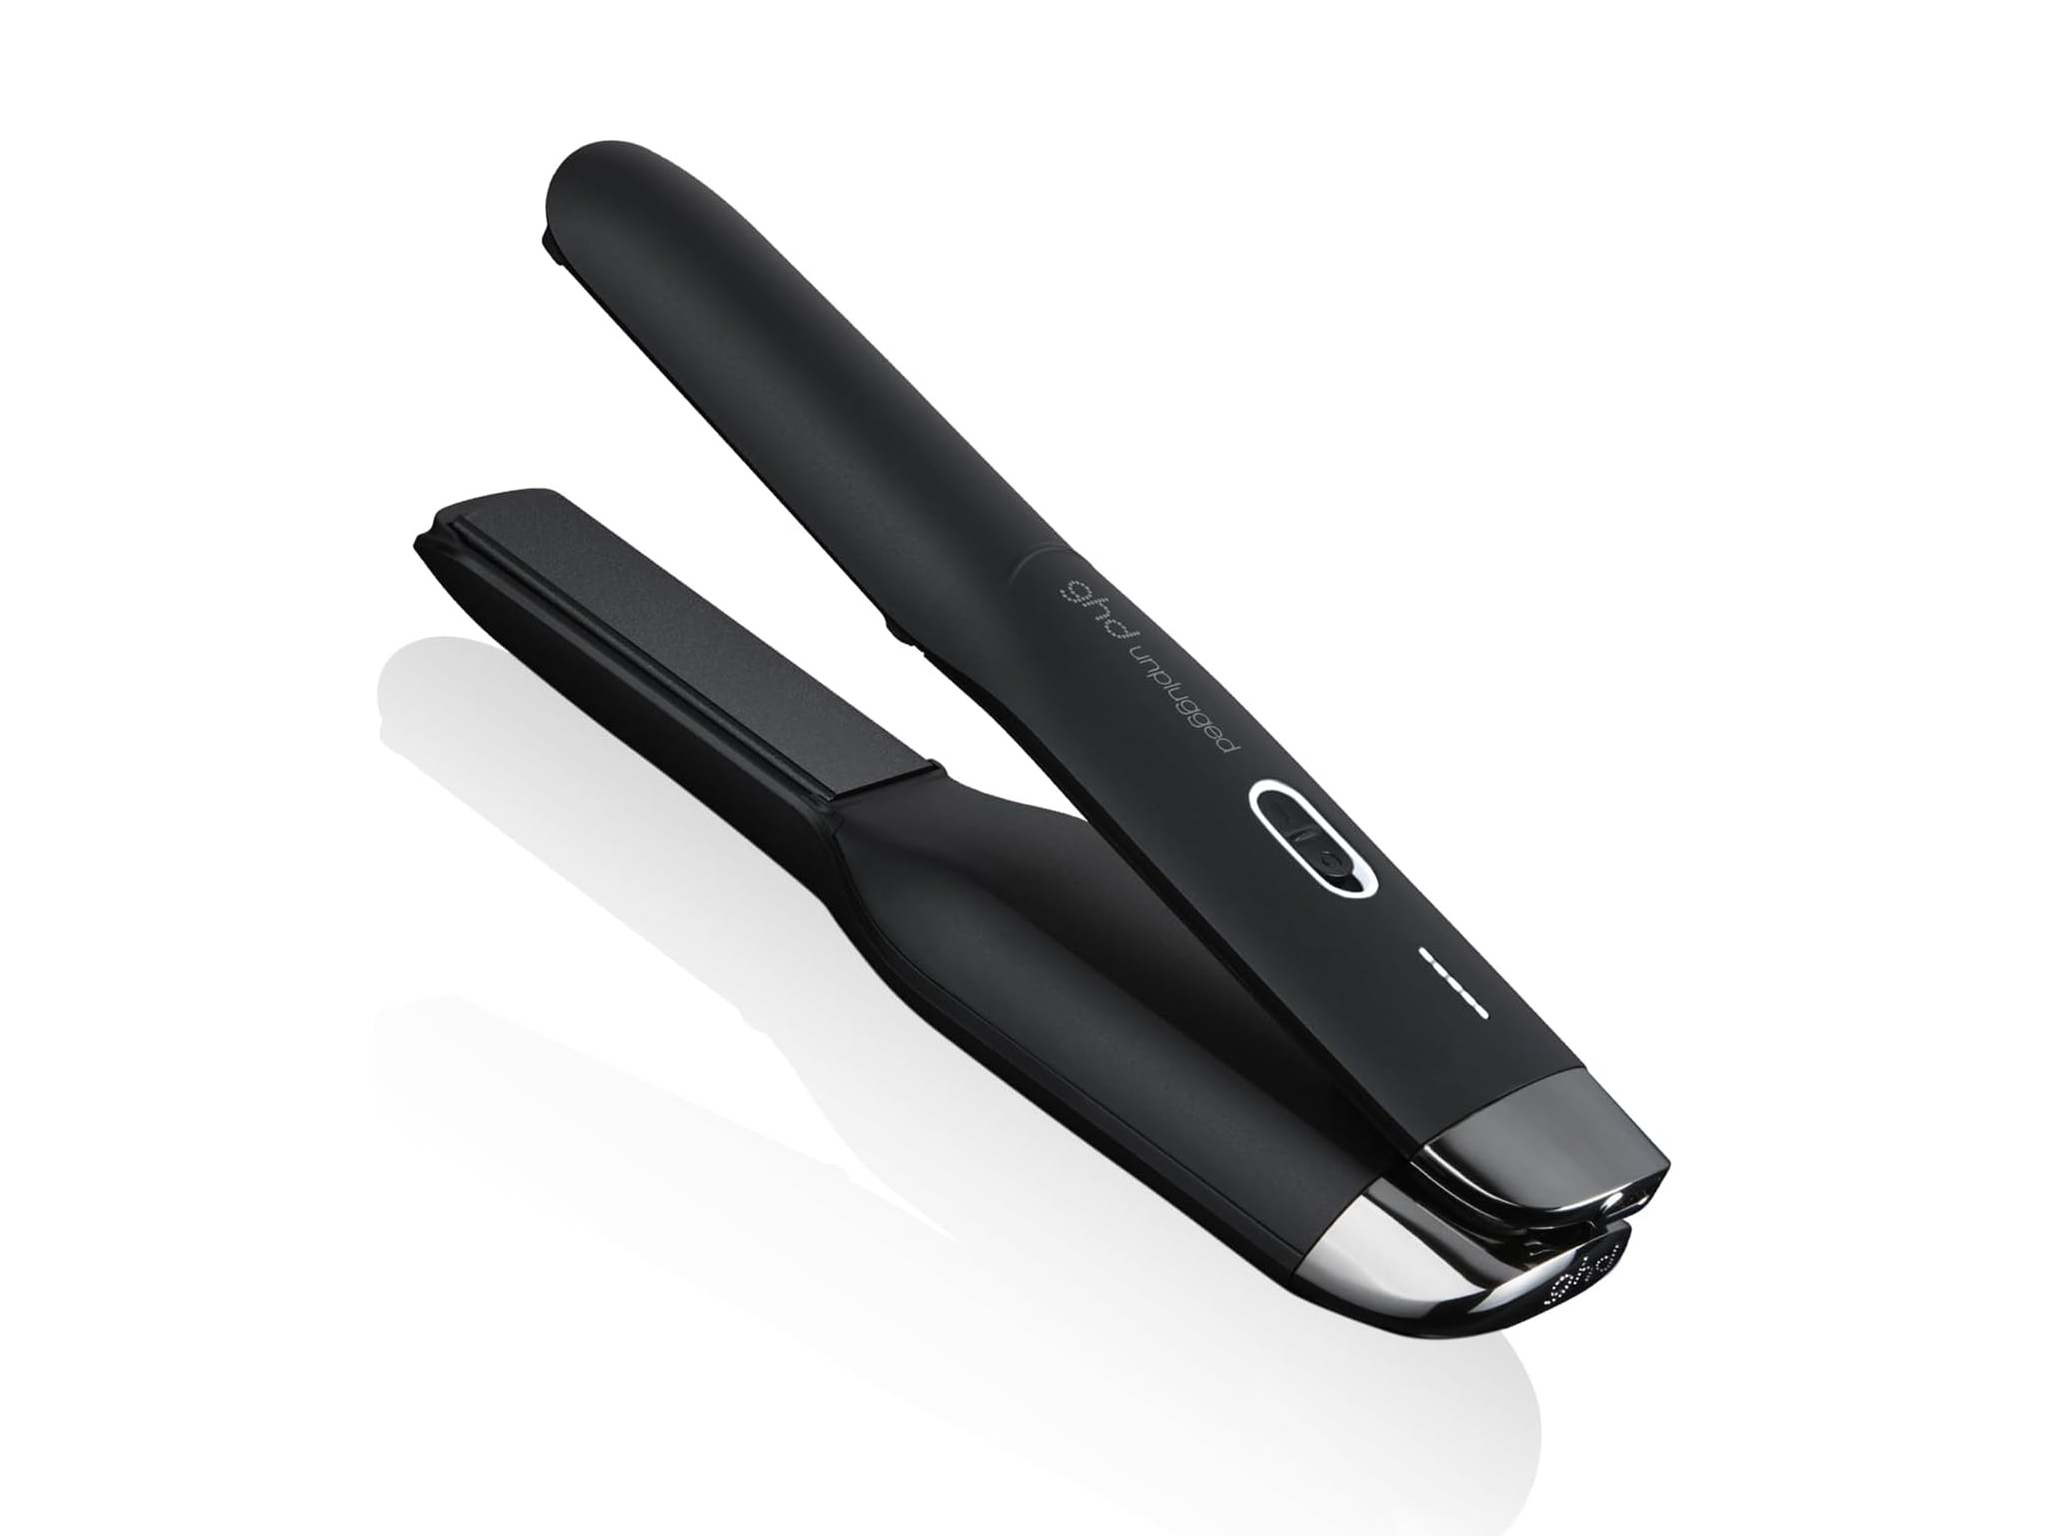 Ghd unplugged cordless hair straighteners